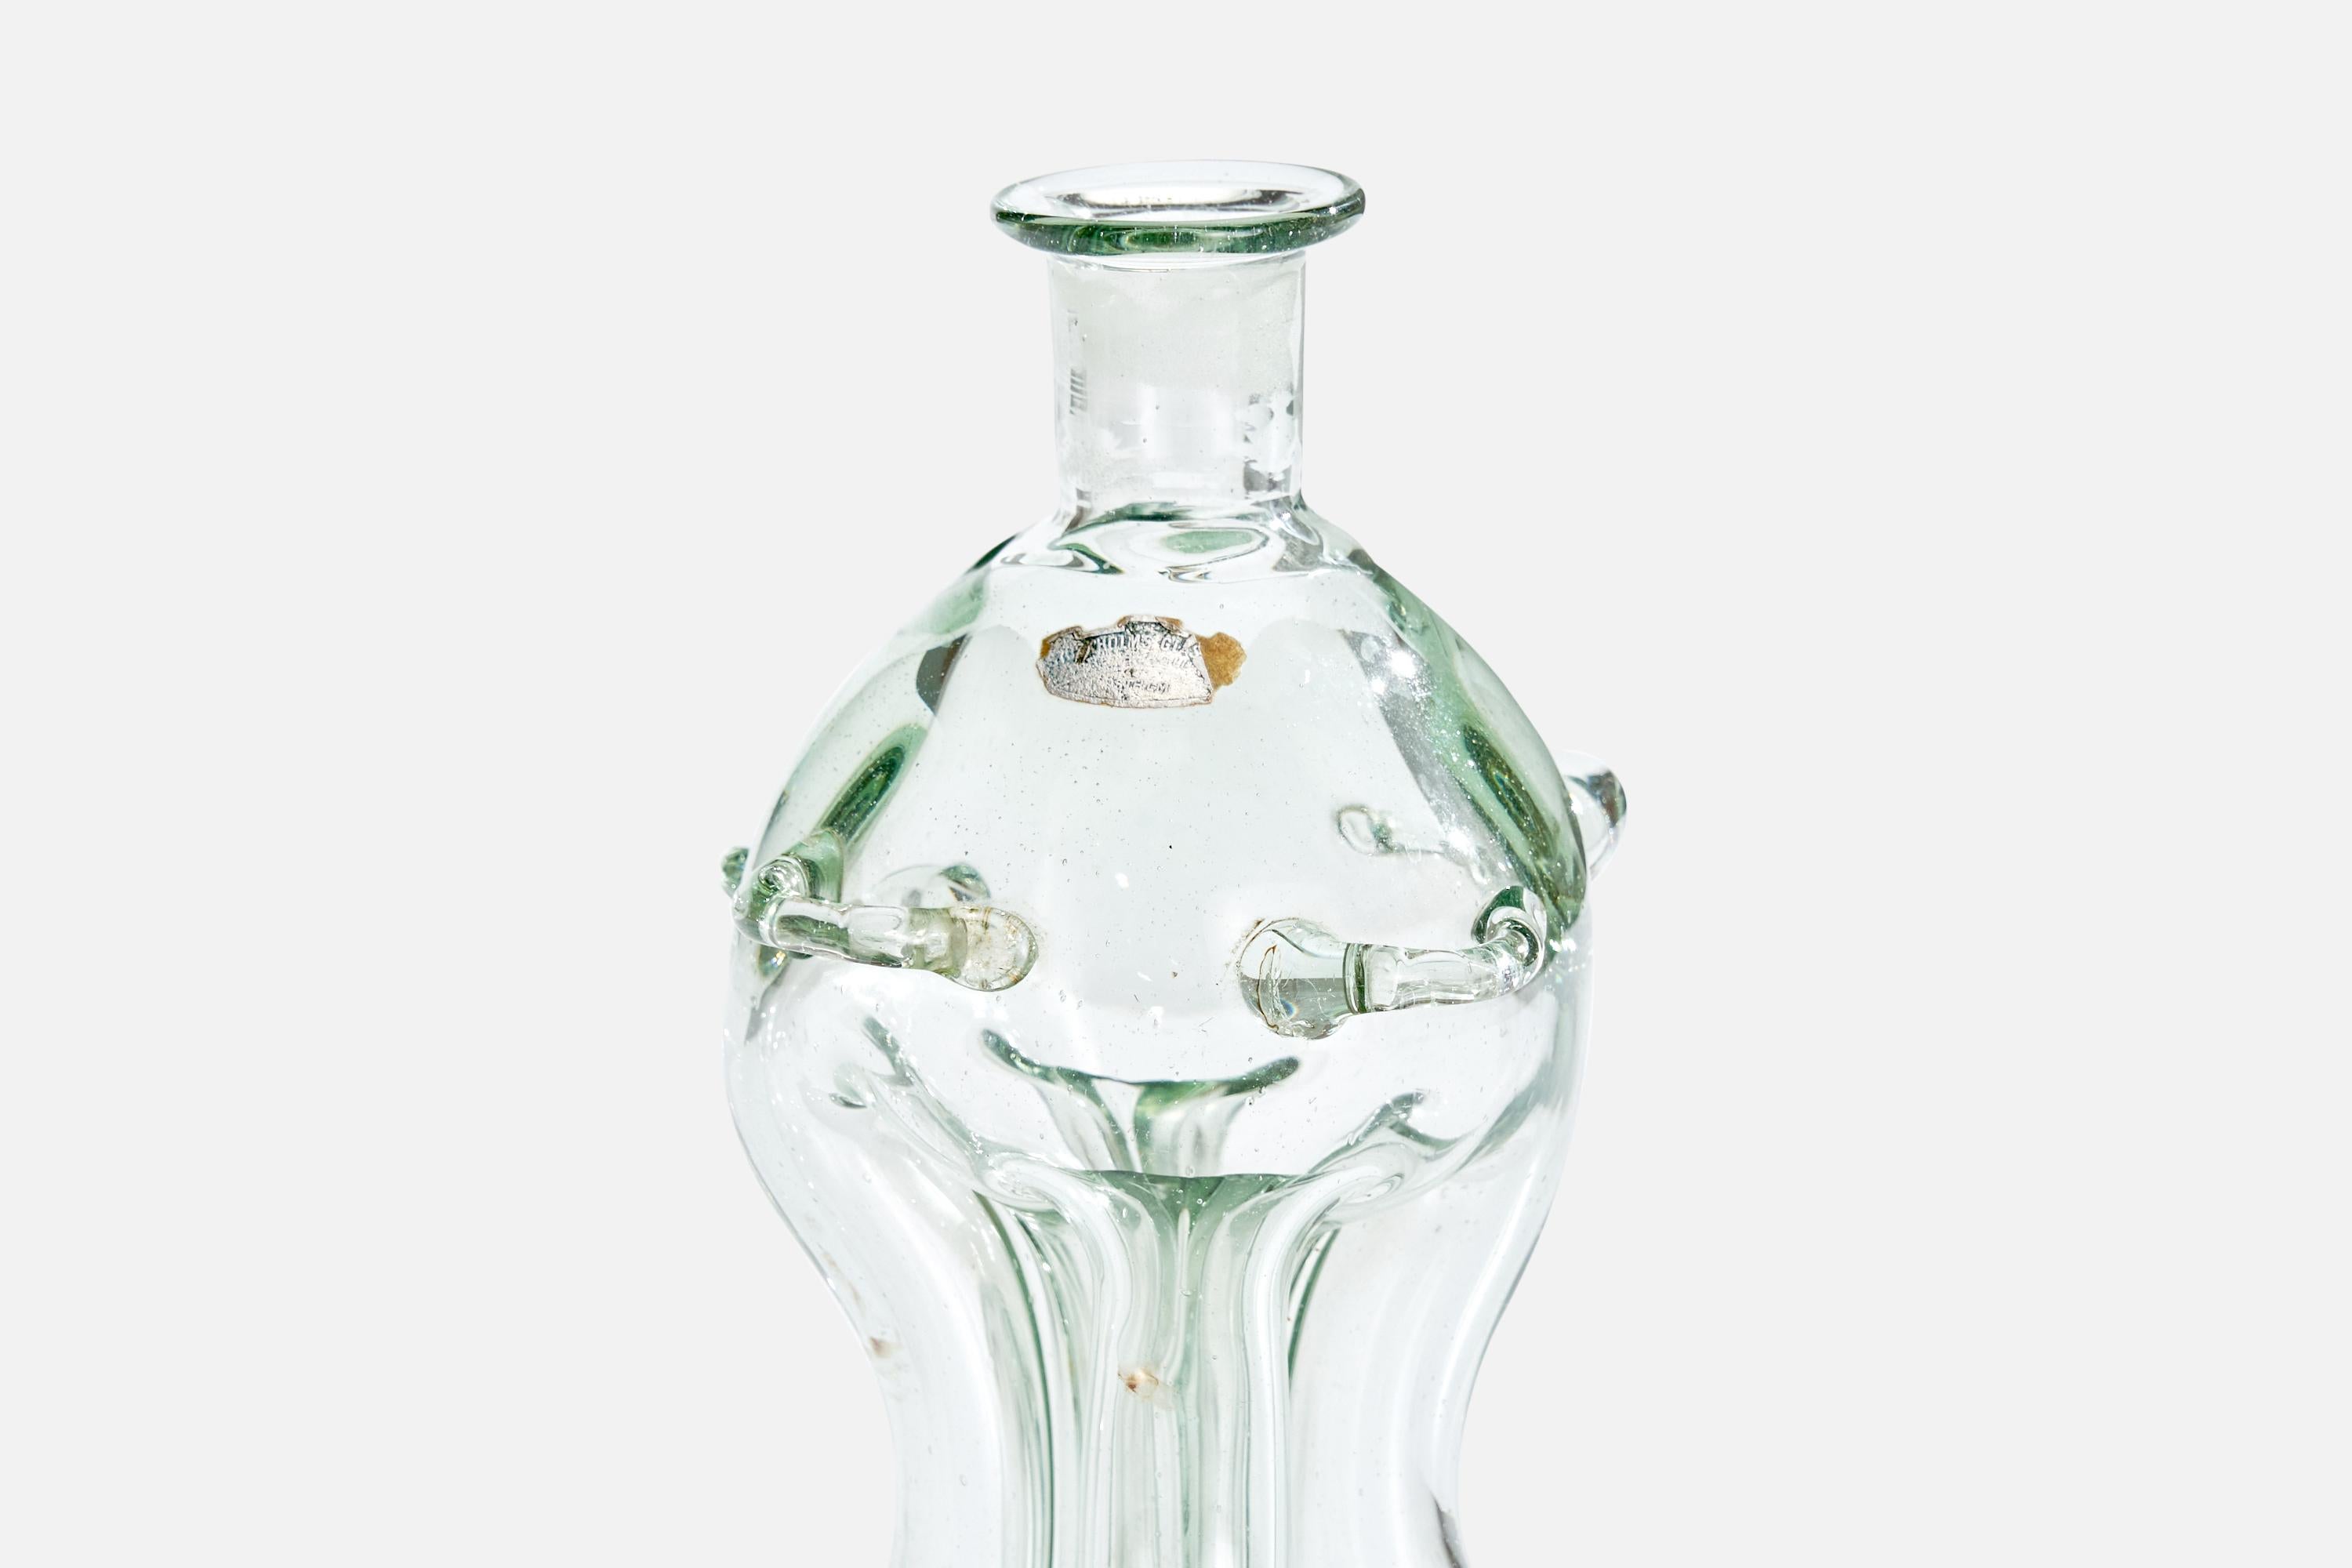 Mid-20th Century Ture Berglund, Bottle, Glass, Sweden, 1940s For Sale